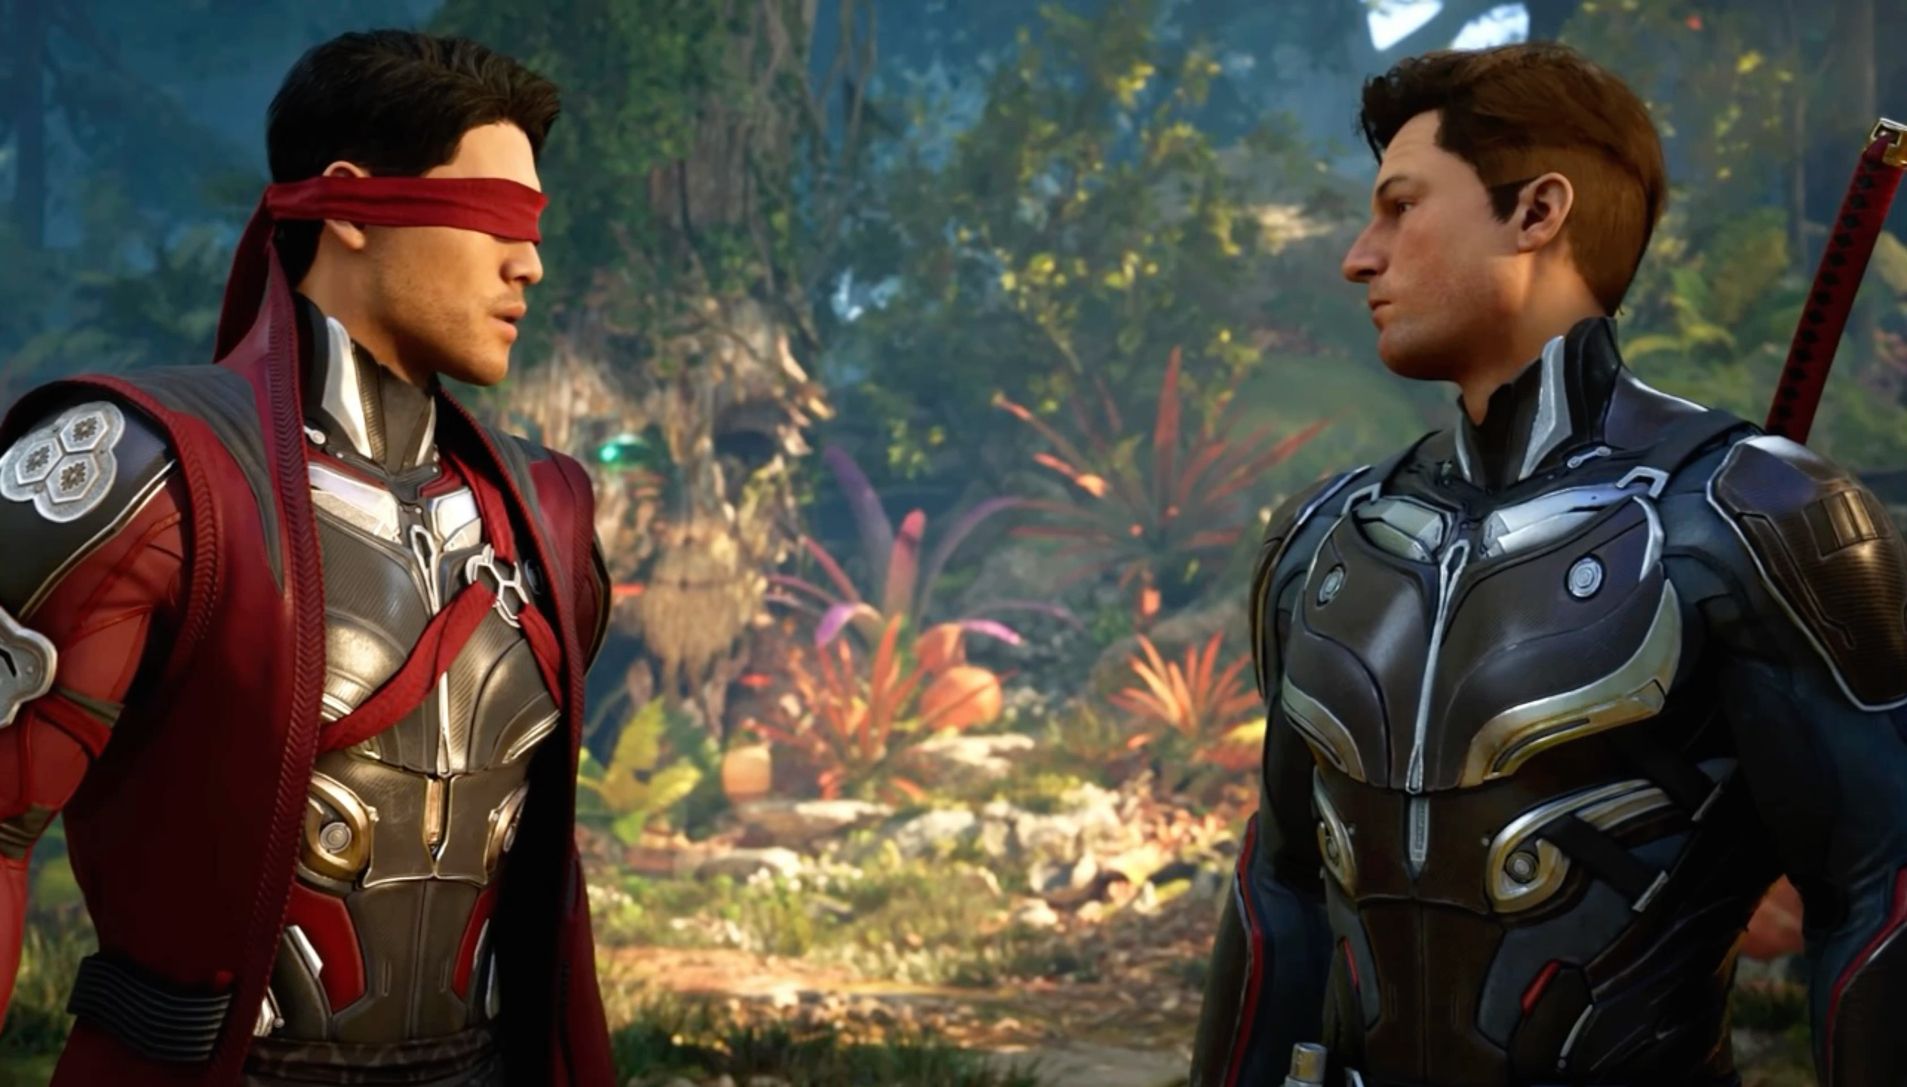 New Twist in Mortal Kombat 1: Homelander Unleashes Epic Brutality on Kenshi Inspired by The Boys